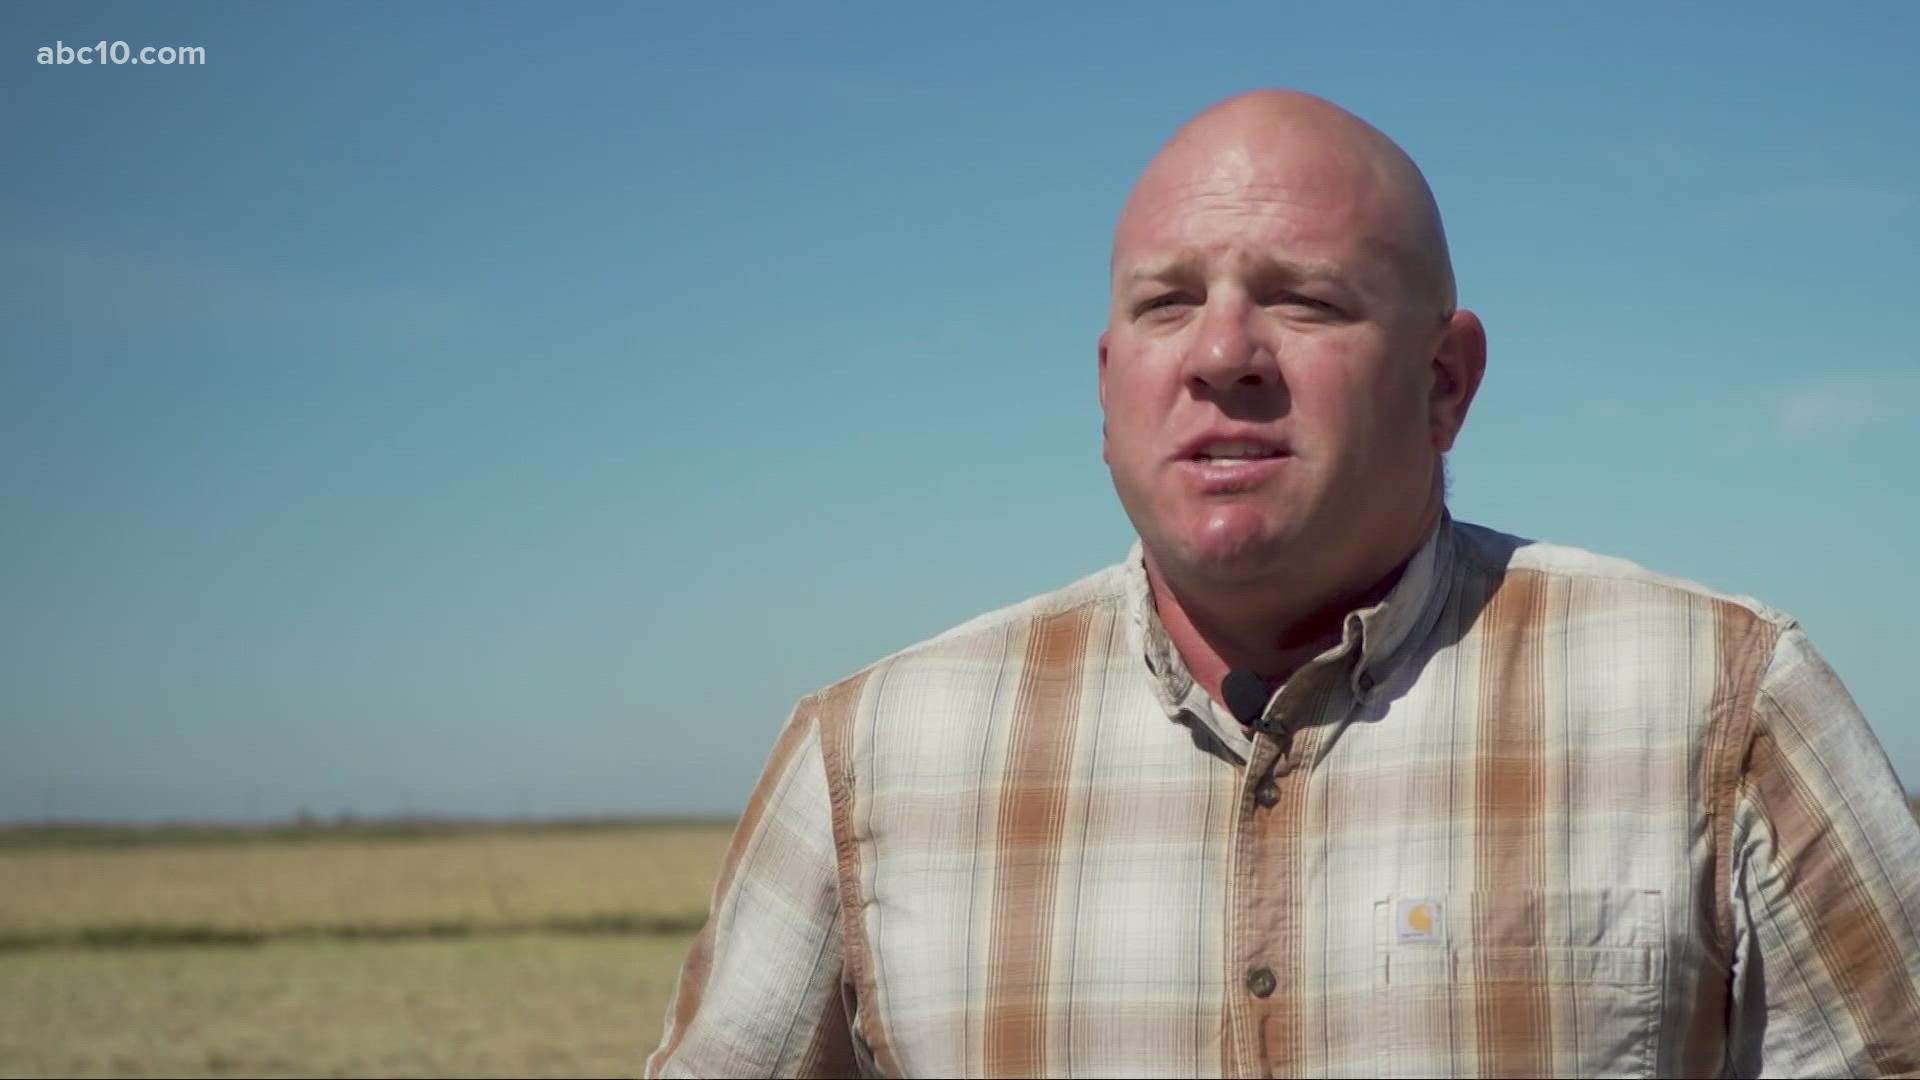 Luke Cleary explains how the California drought is impacting the rice harvest.